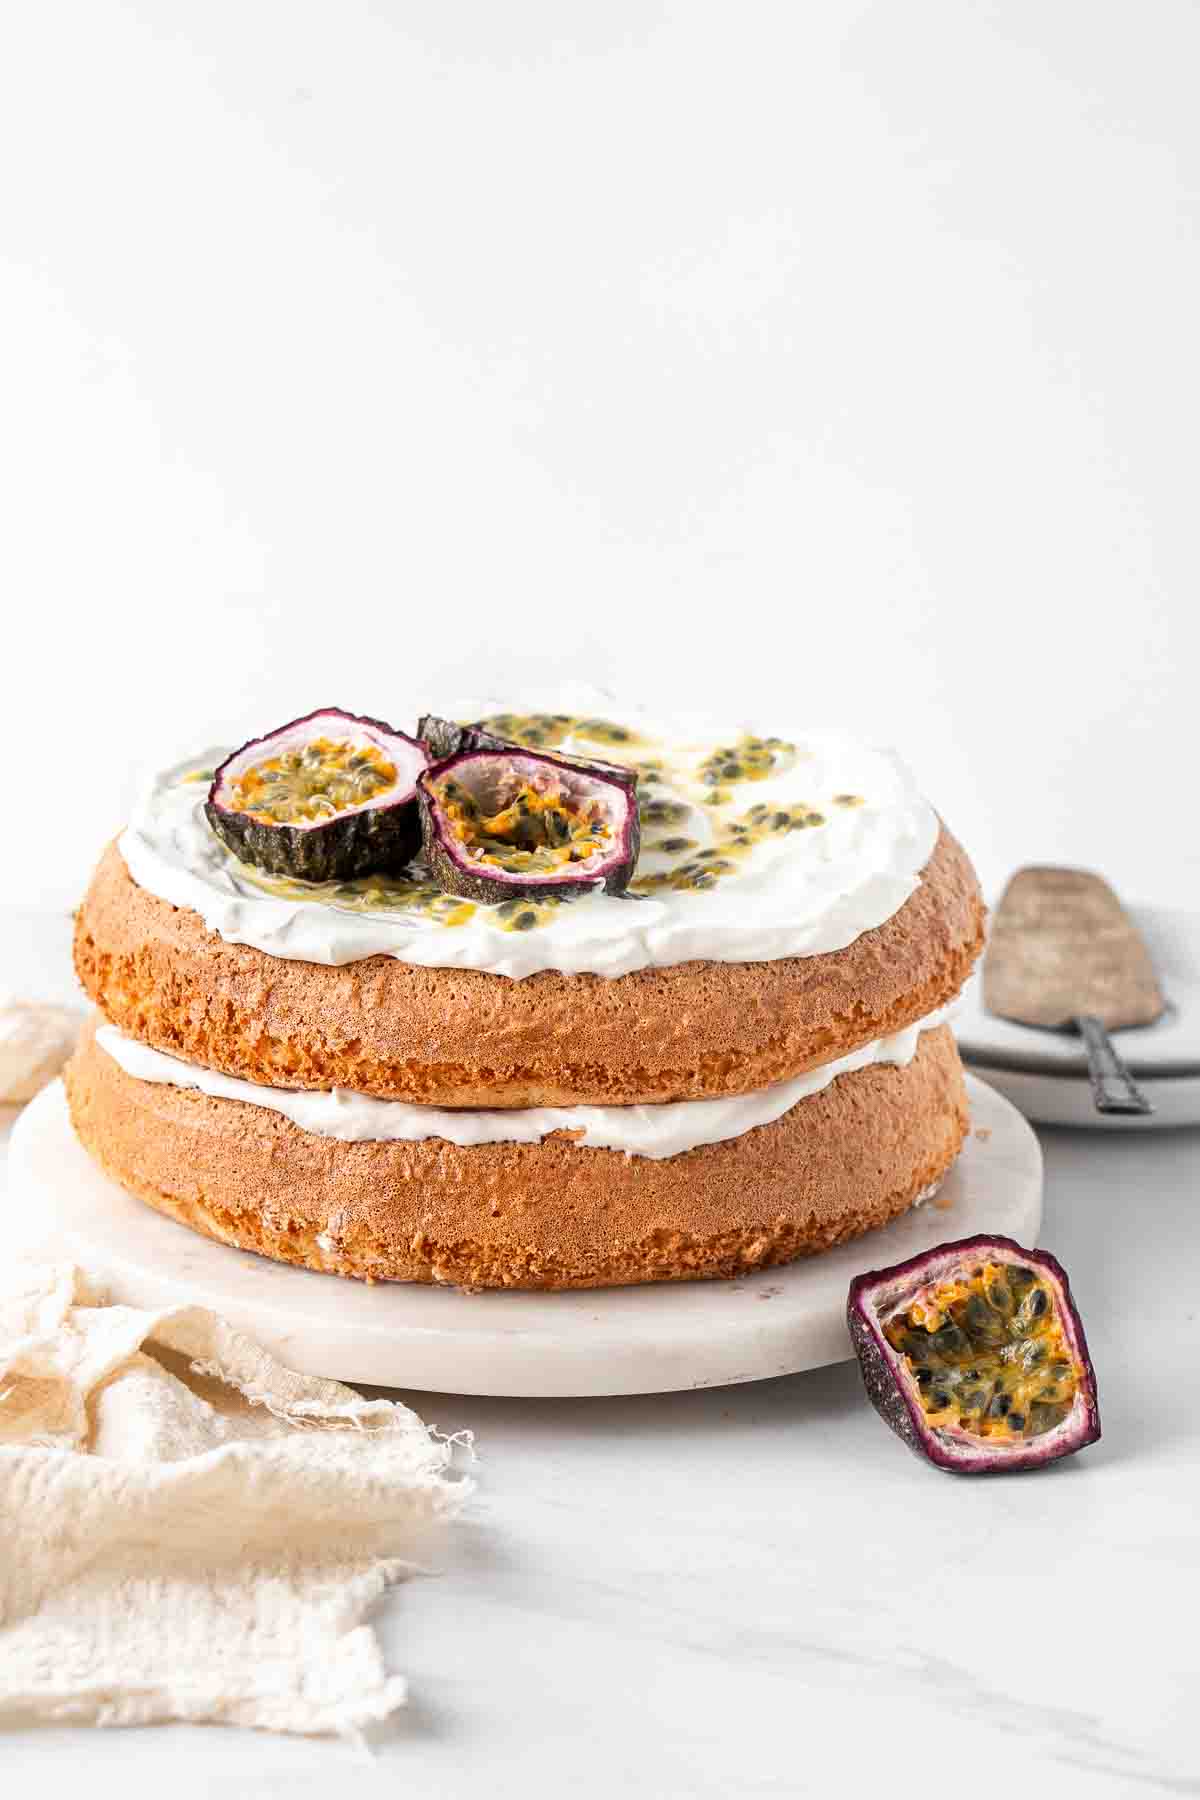 Dairy free passionfruit sponge cake topped with fresh passionfruit and whipped cream.